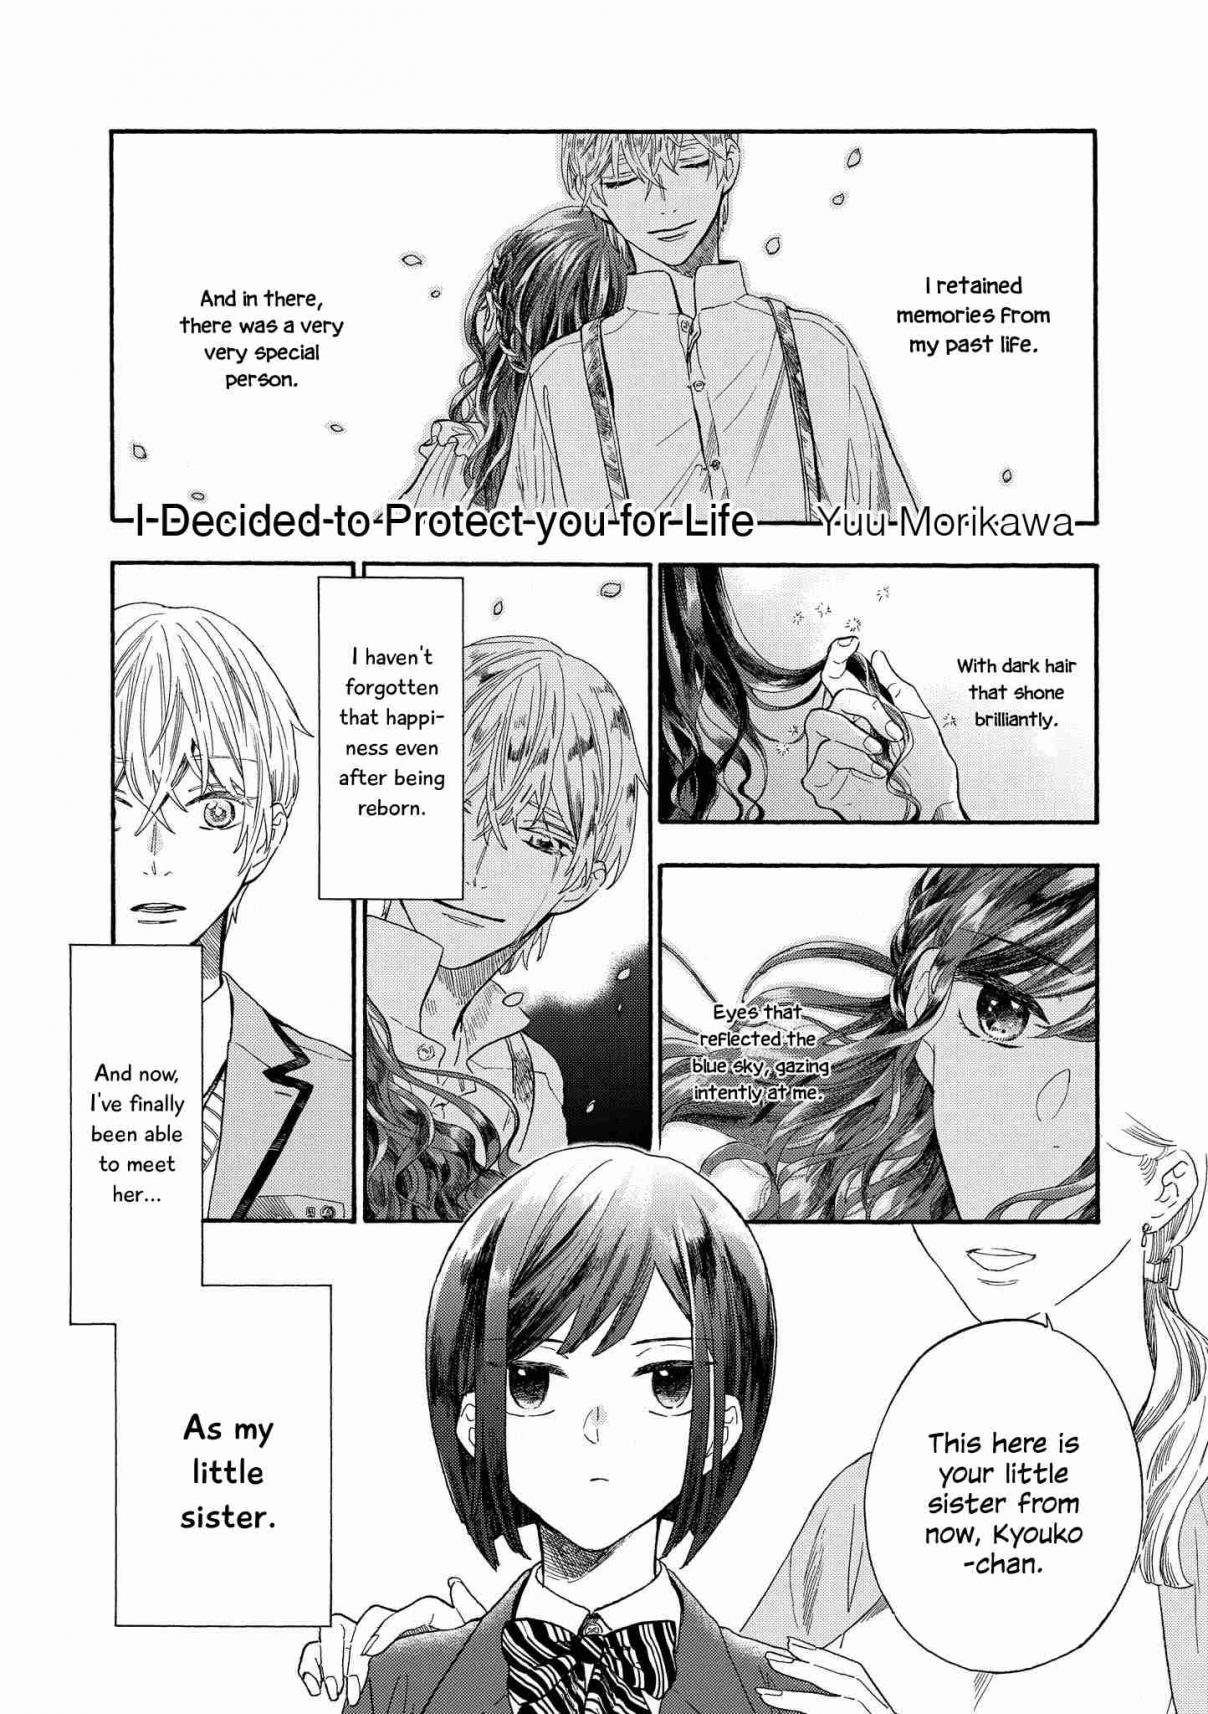 “It’s Too Precious and Hard to Read!!” 4P Short Stories Vol. 1 Ch. 14 I Decided to Protect You for Life [by Yuu Morikawa]